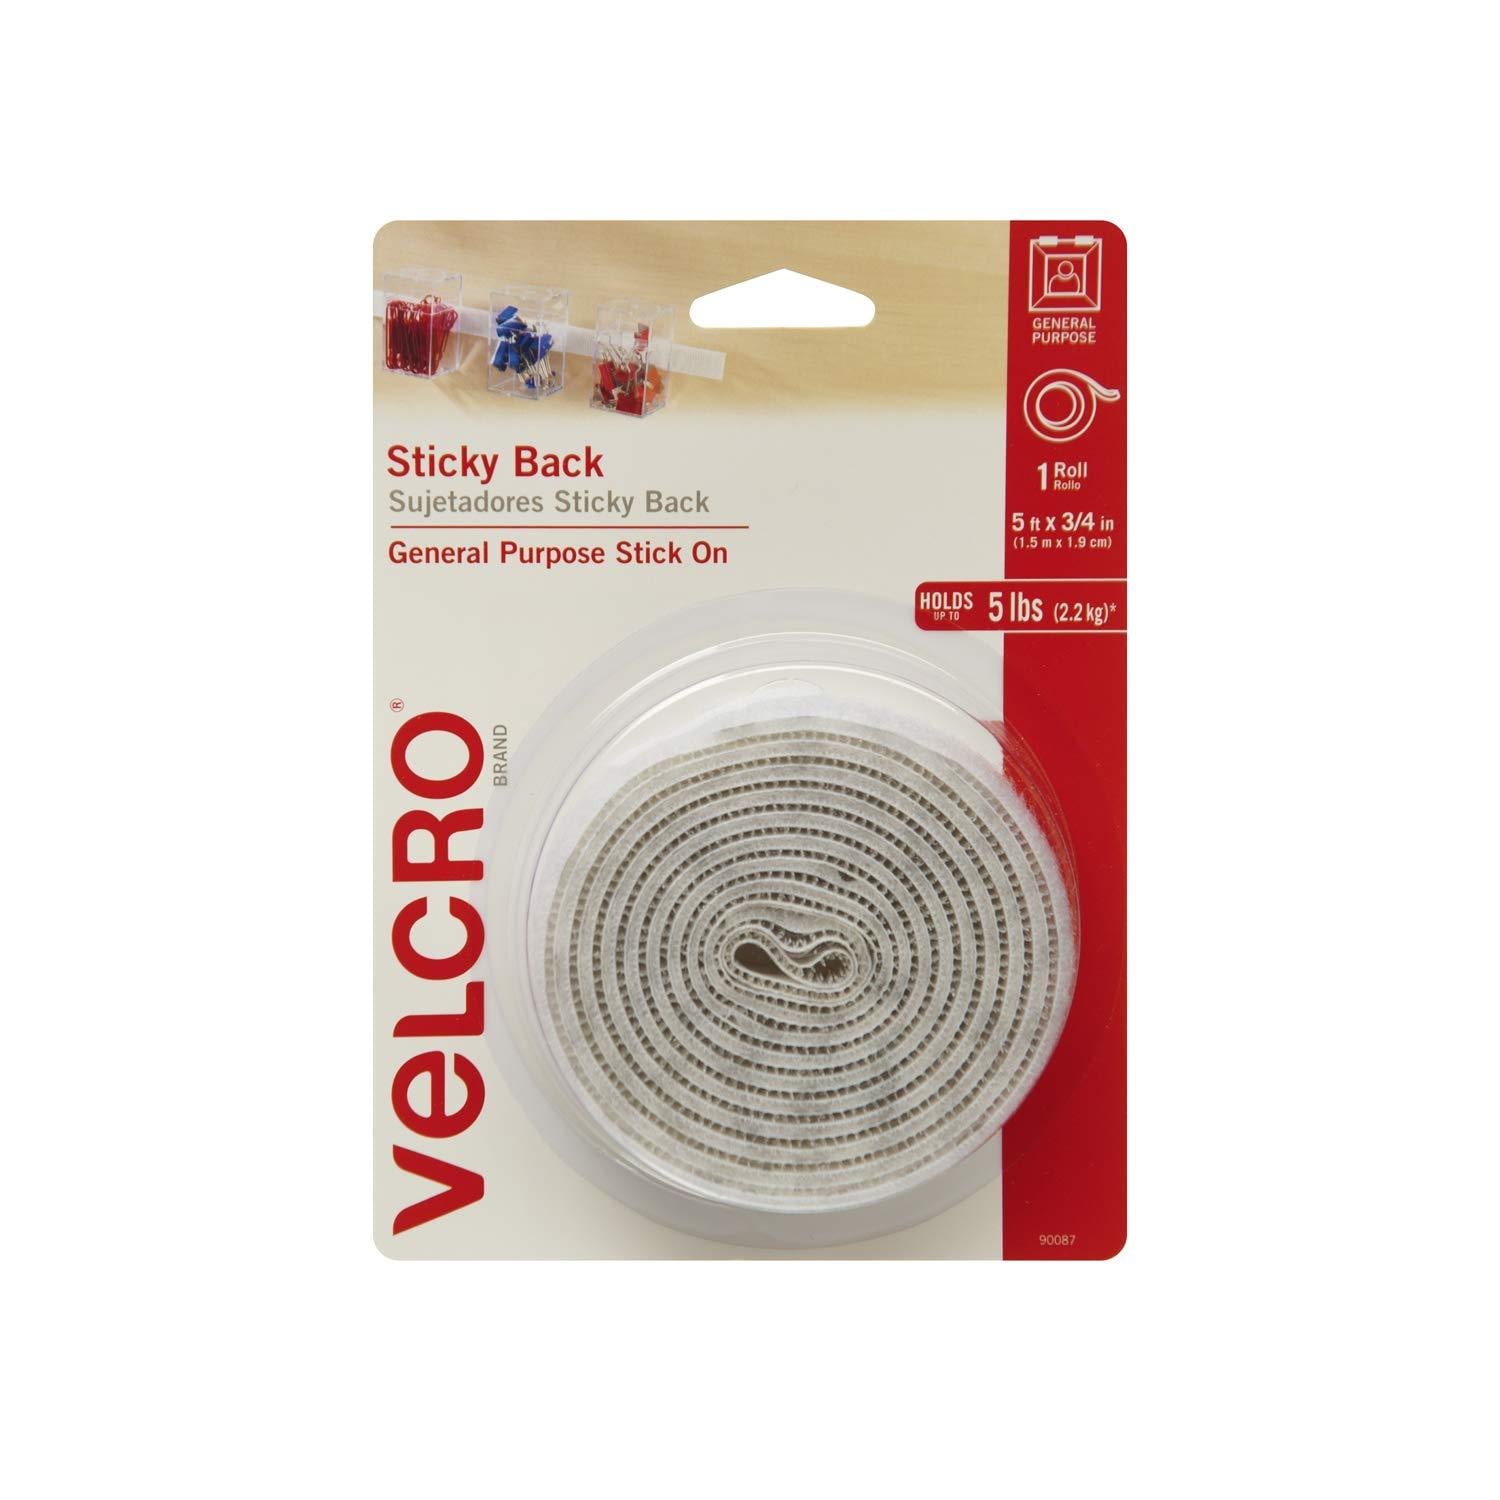 White 18in x 3/4in Tape Sticky Back Hook and Loop Fasteners| Perfect for Home or Office VELCRO Brand